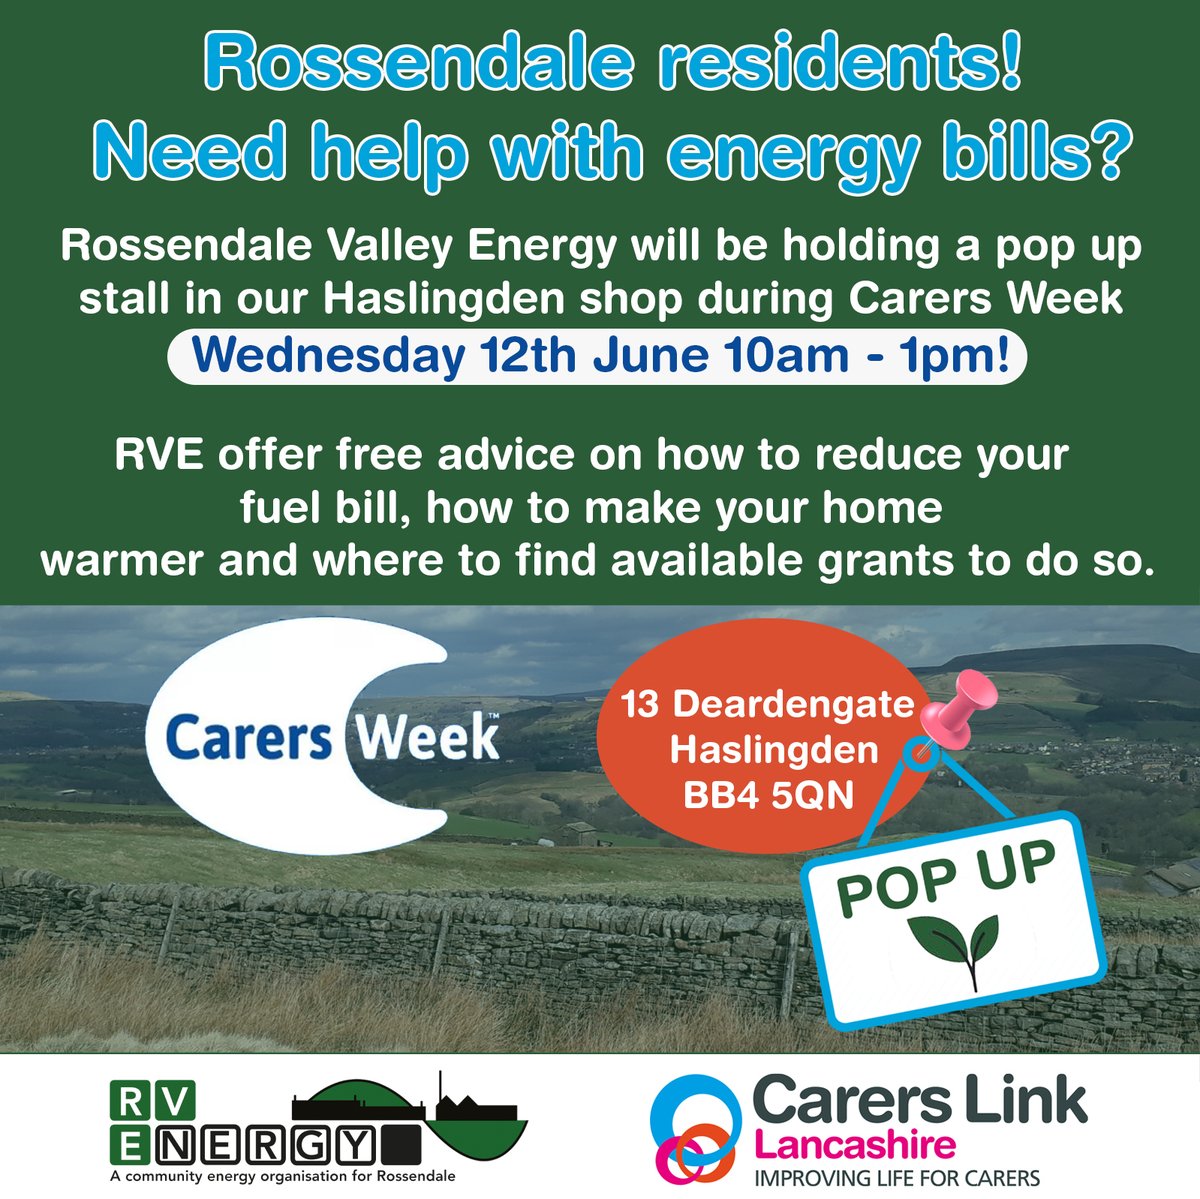 Rossendale Valley Energy are holding their monthly pop ups at our Haslingden shop for the month of June during Carers Week! Pop into the shop on 12th June from 10am - 1pm to ask for free advice on reducing your energy bills and grants for carers and your home.